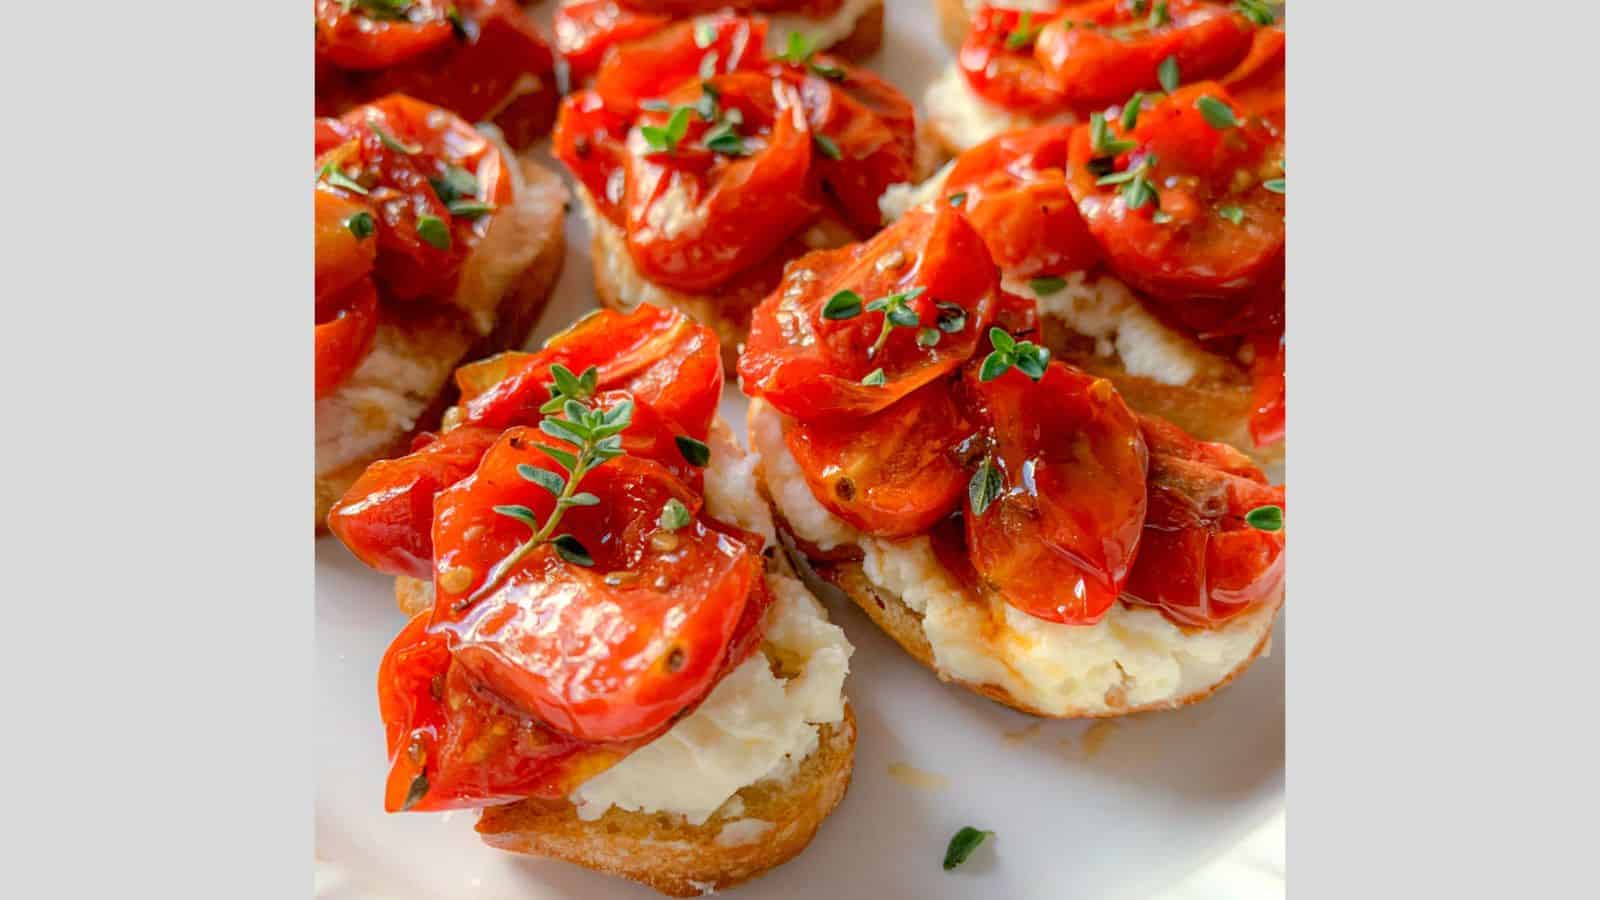 Roasted tomatoes atop toasted bread rounds with feta cheese.